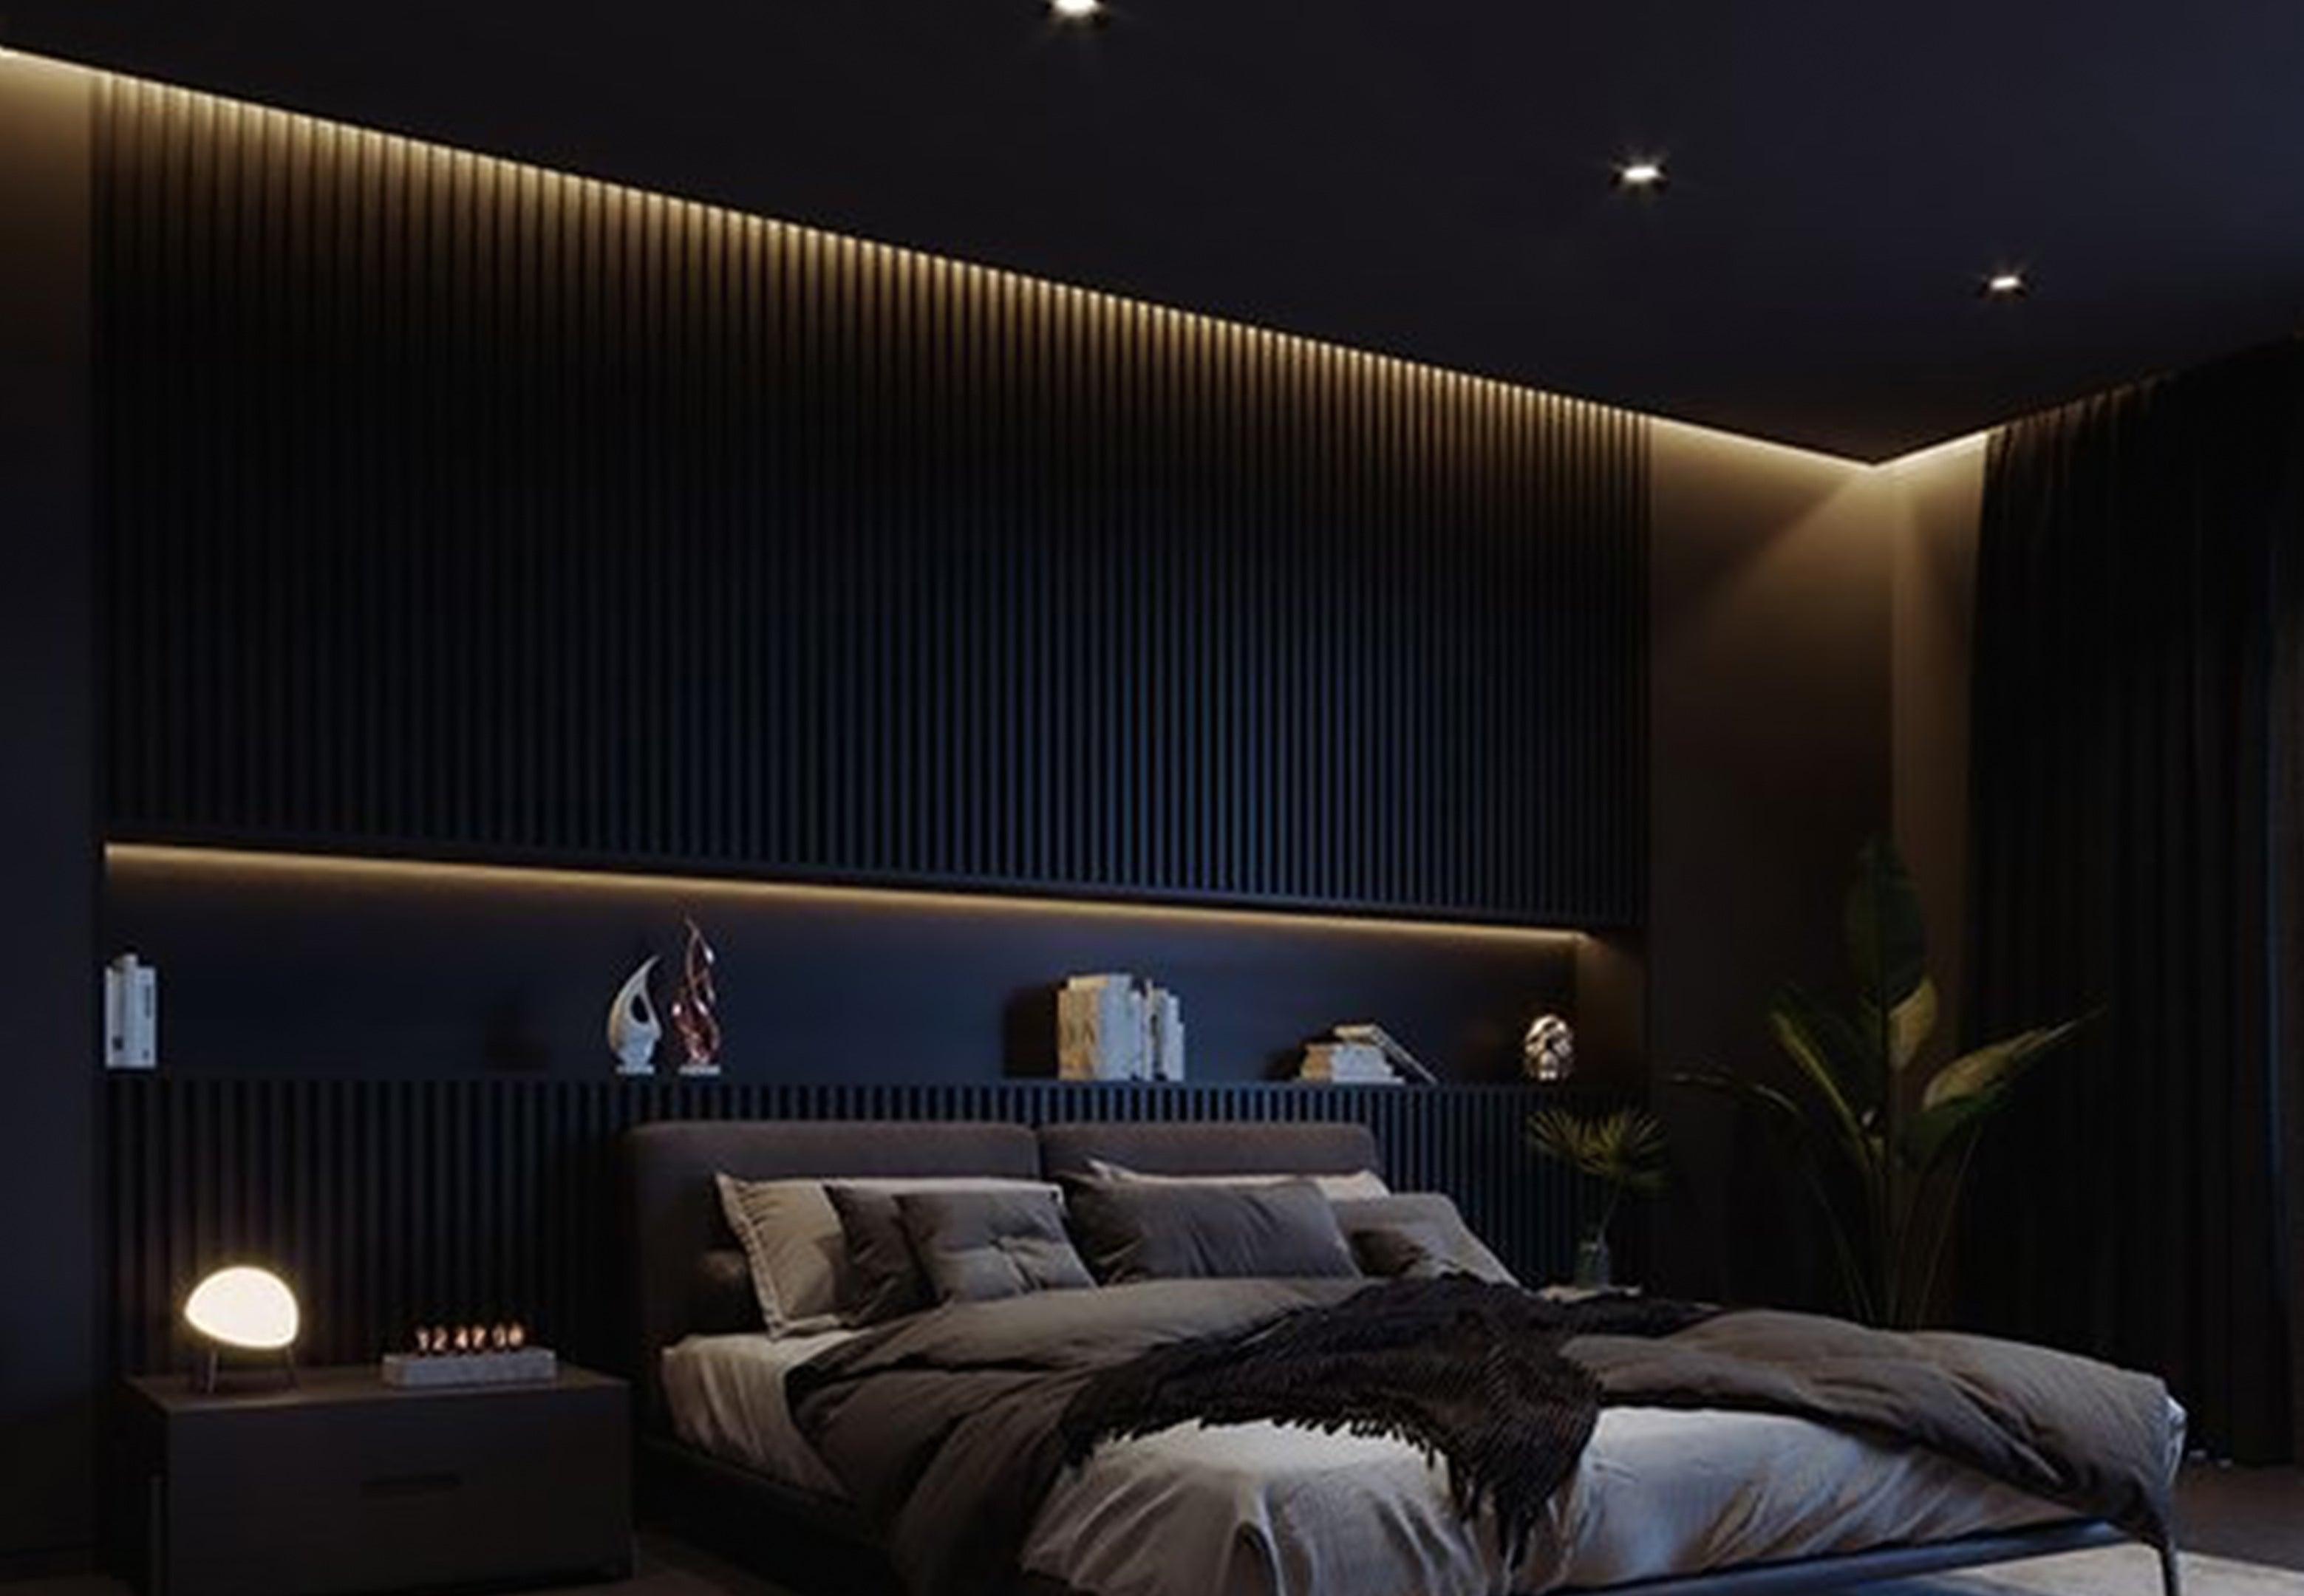 What Is The Best Lighting For A Dark Room